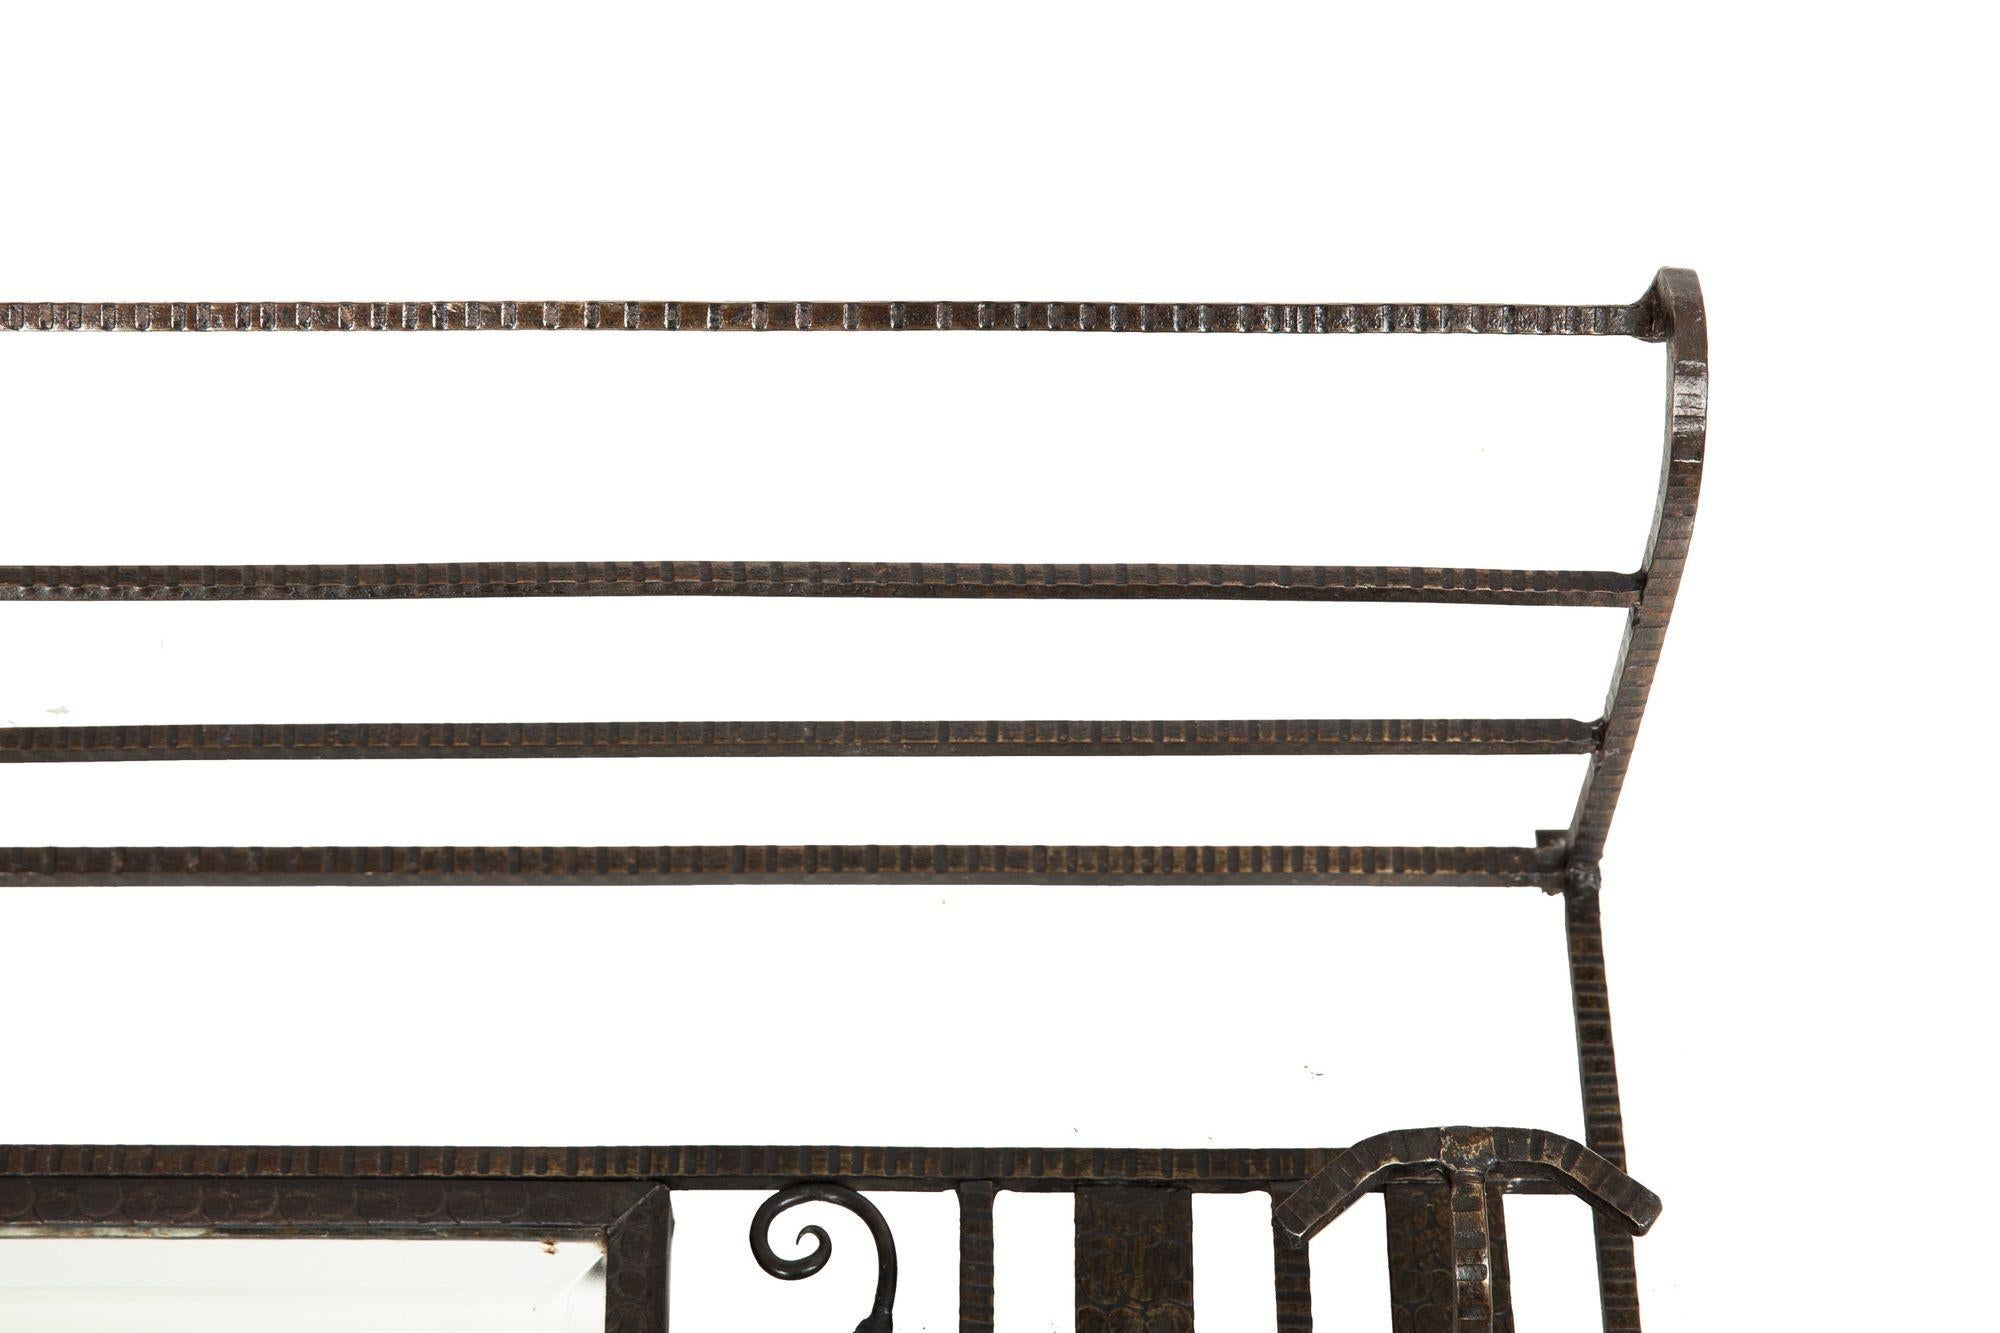 ART DECO PERIOD WROUGHT-IRON MIRRORED HALL-RACK
Circa 1930s  with 4 coat hooks and a top shelf
Item # 306CWT14P 

A very cool hallway mirror designed with an eye to nature out of wrought-iron, the geometrical and angular body is interlaced with